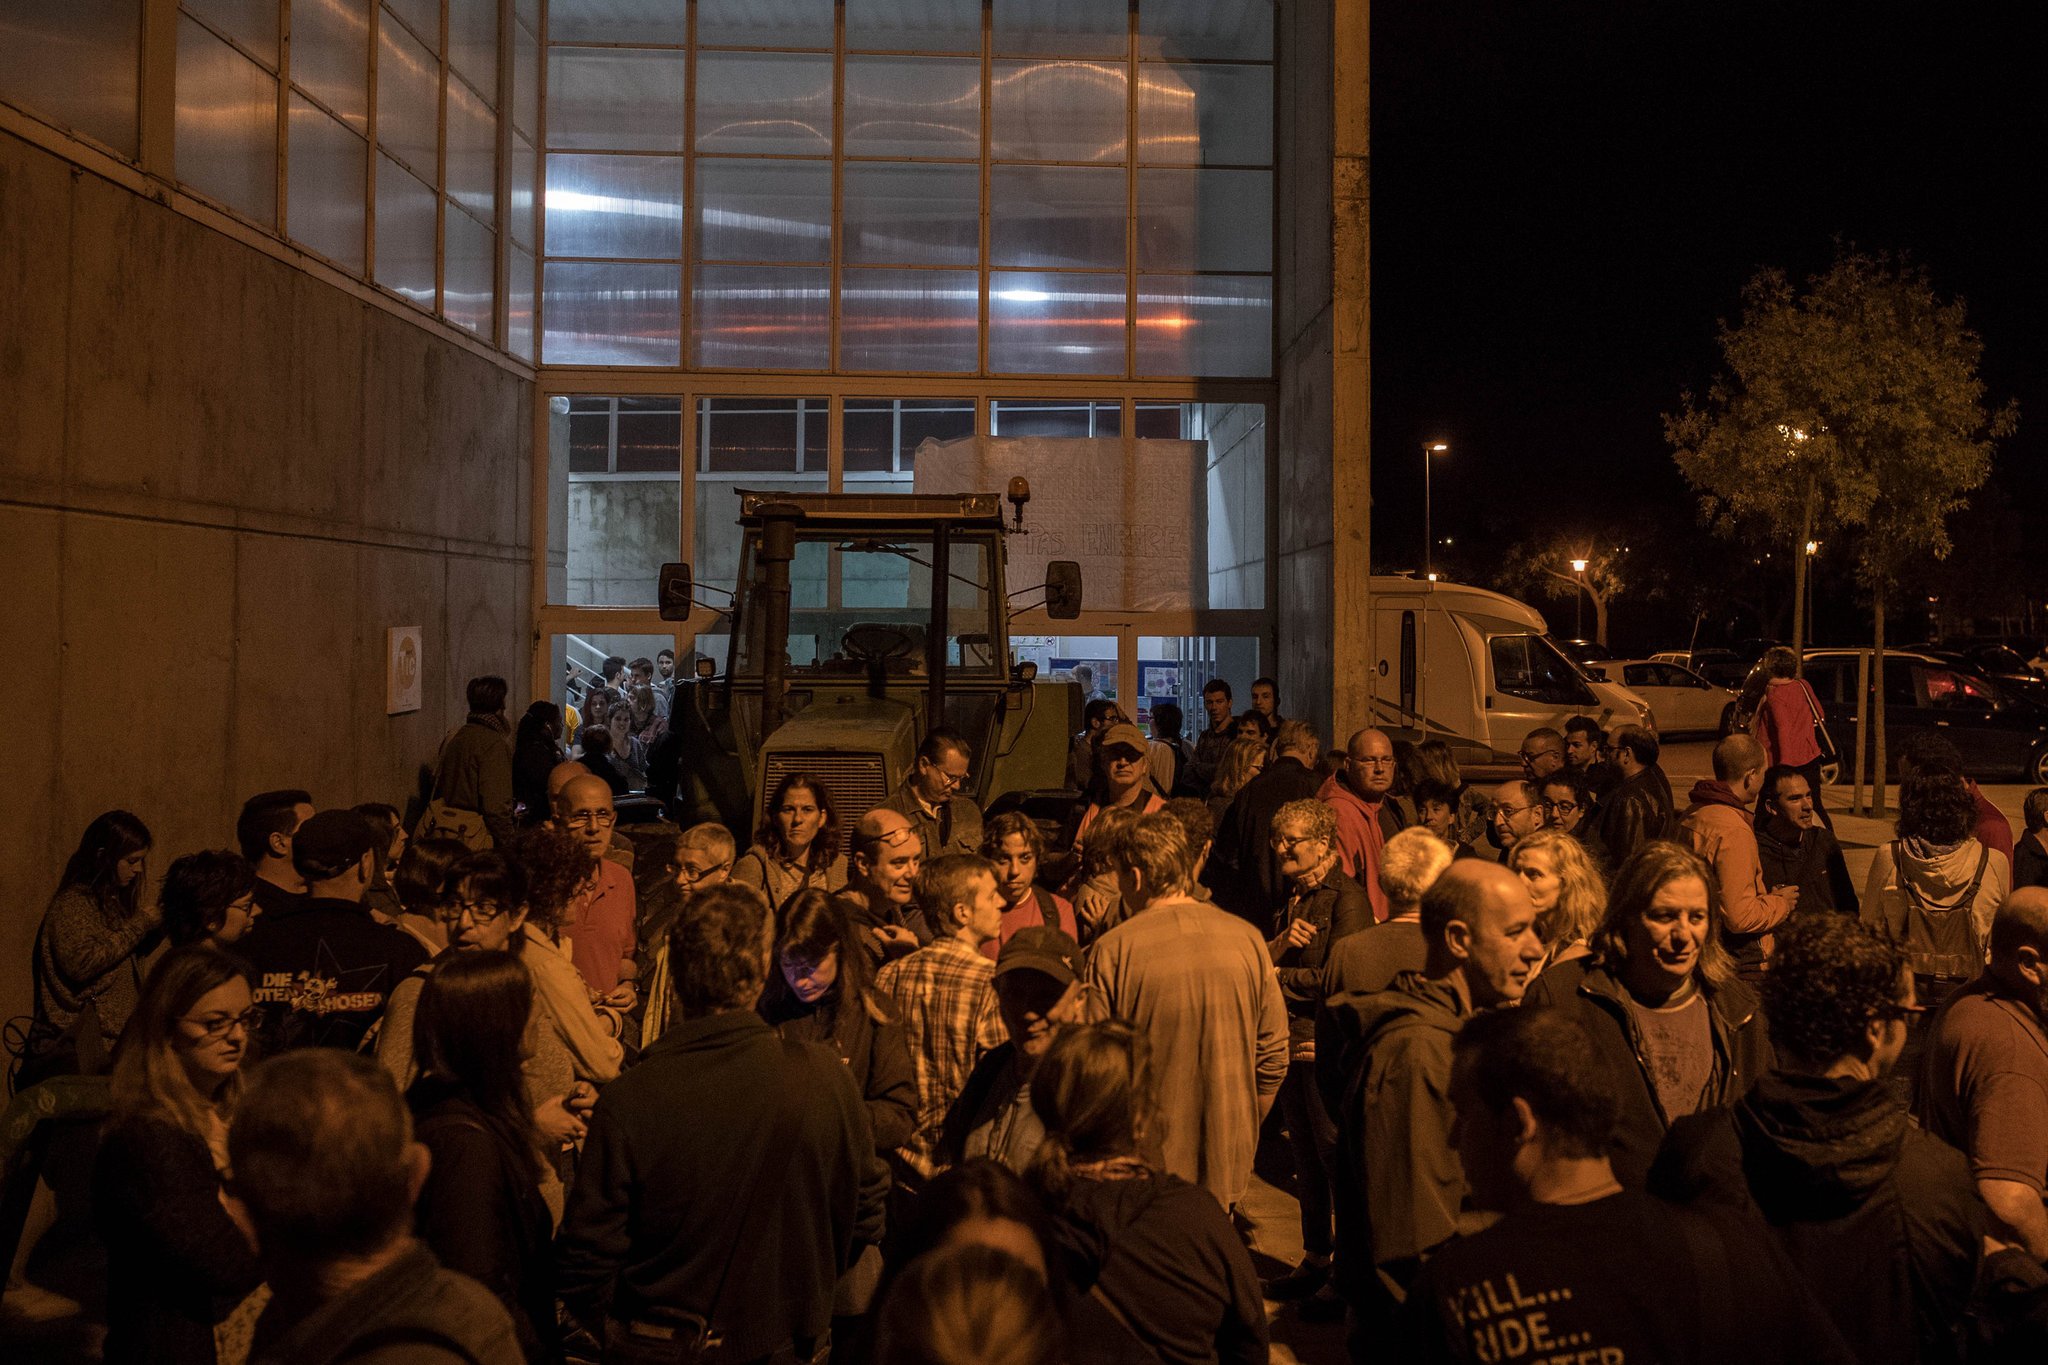 A tractor was used to block police access to a polling station in Sant Julià de Ramis. Credit David Ramos/Getty Images